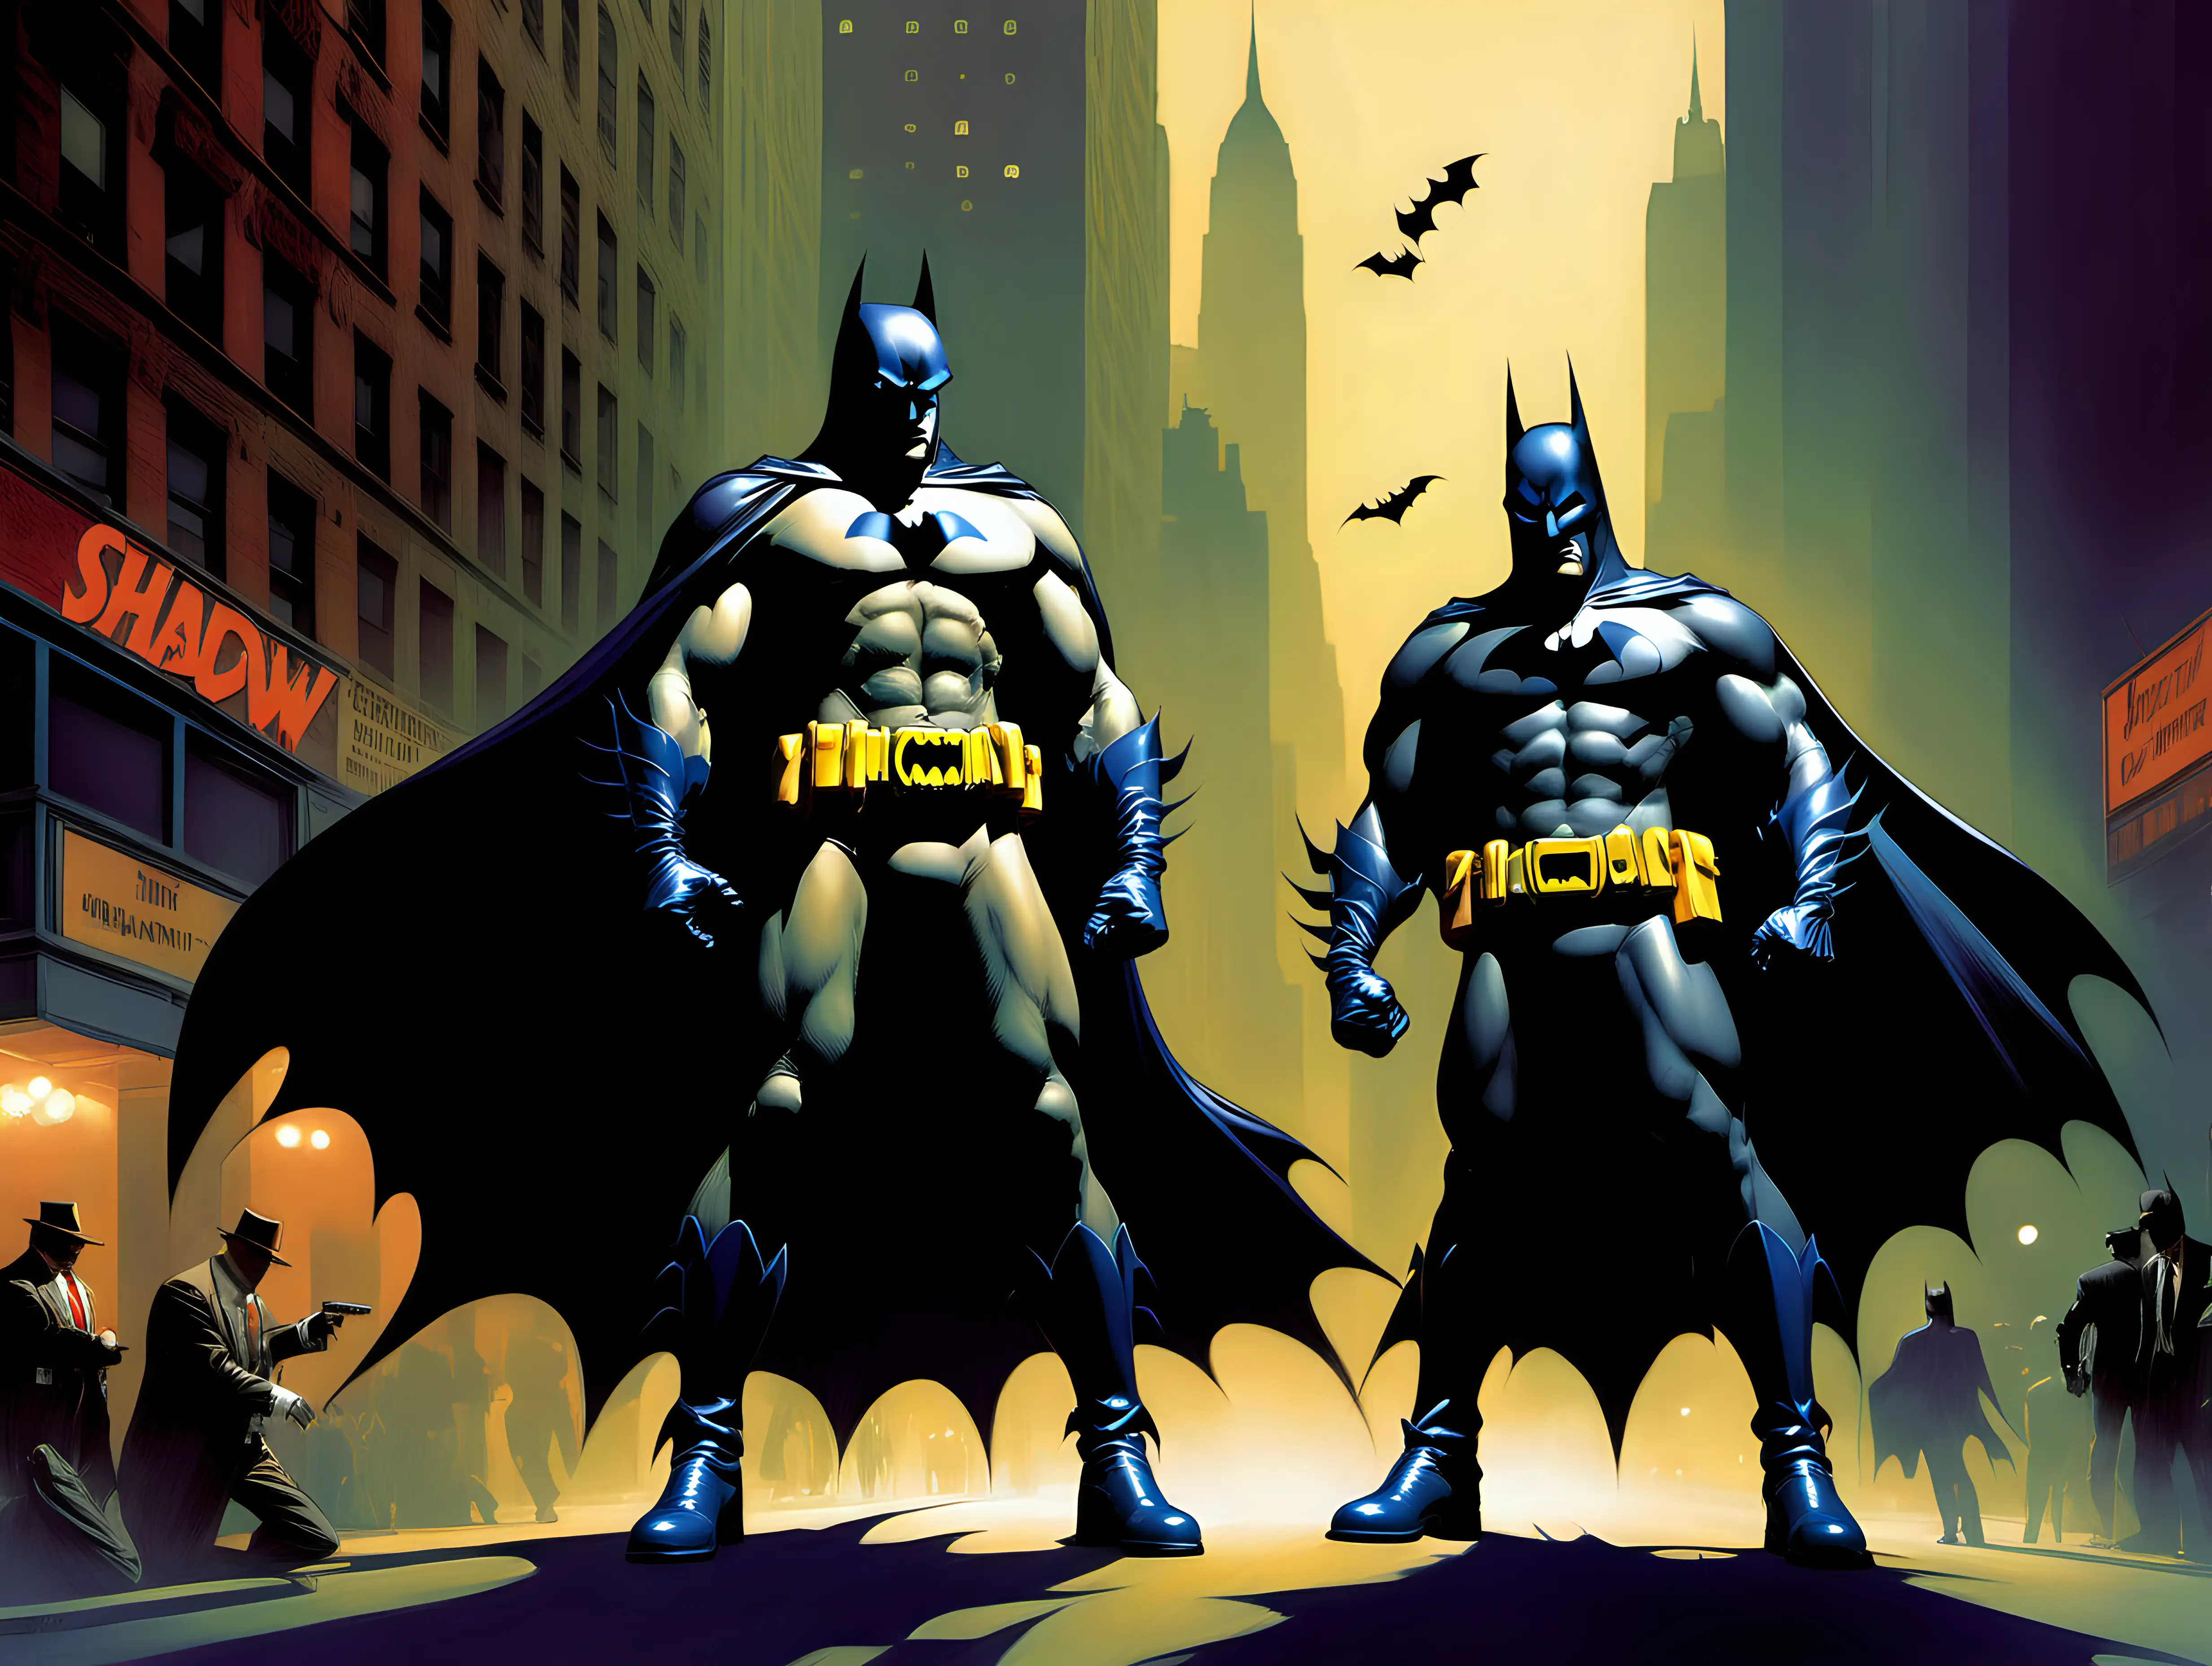 Epic Battle The Shadow and Batman Unite as Crimefighters in NYC